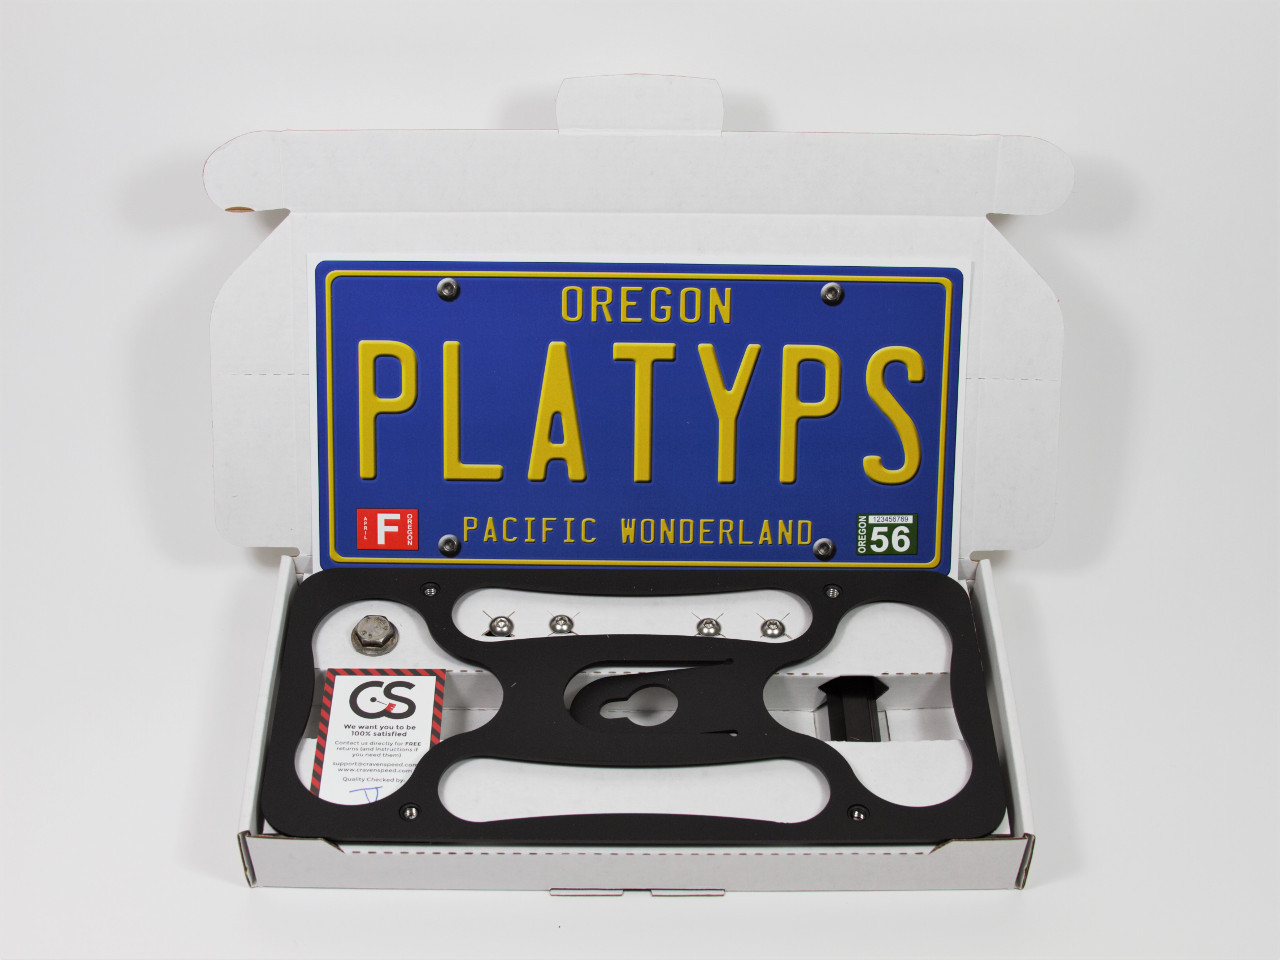 The Platypus License Plate Mount packaging